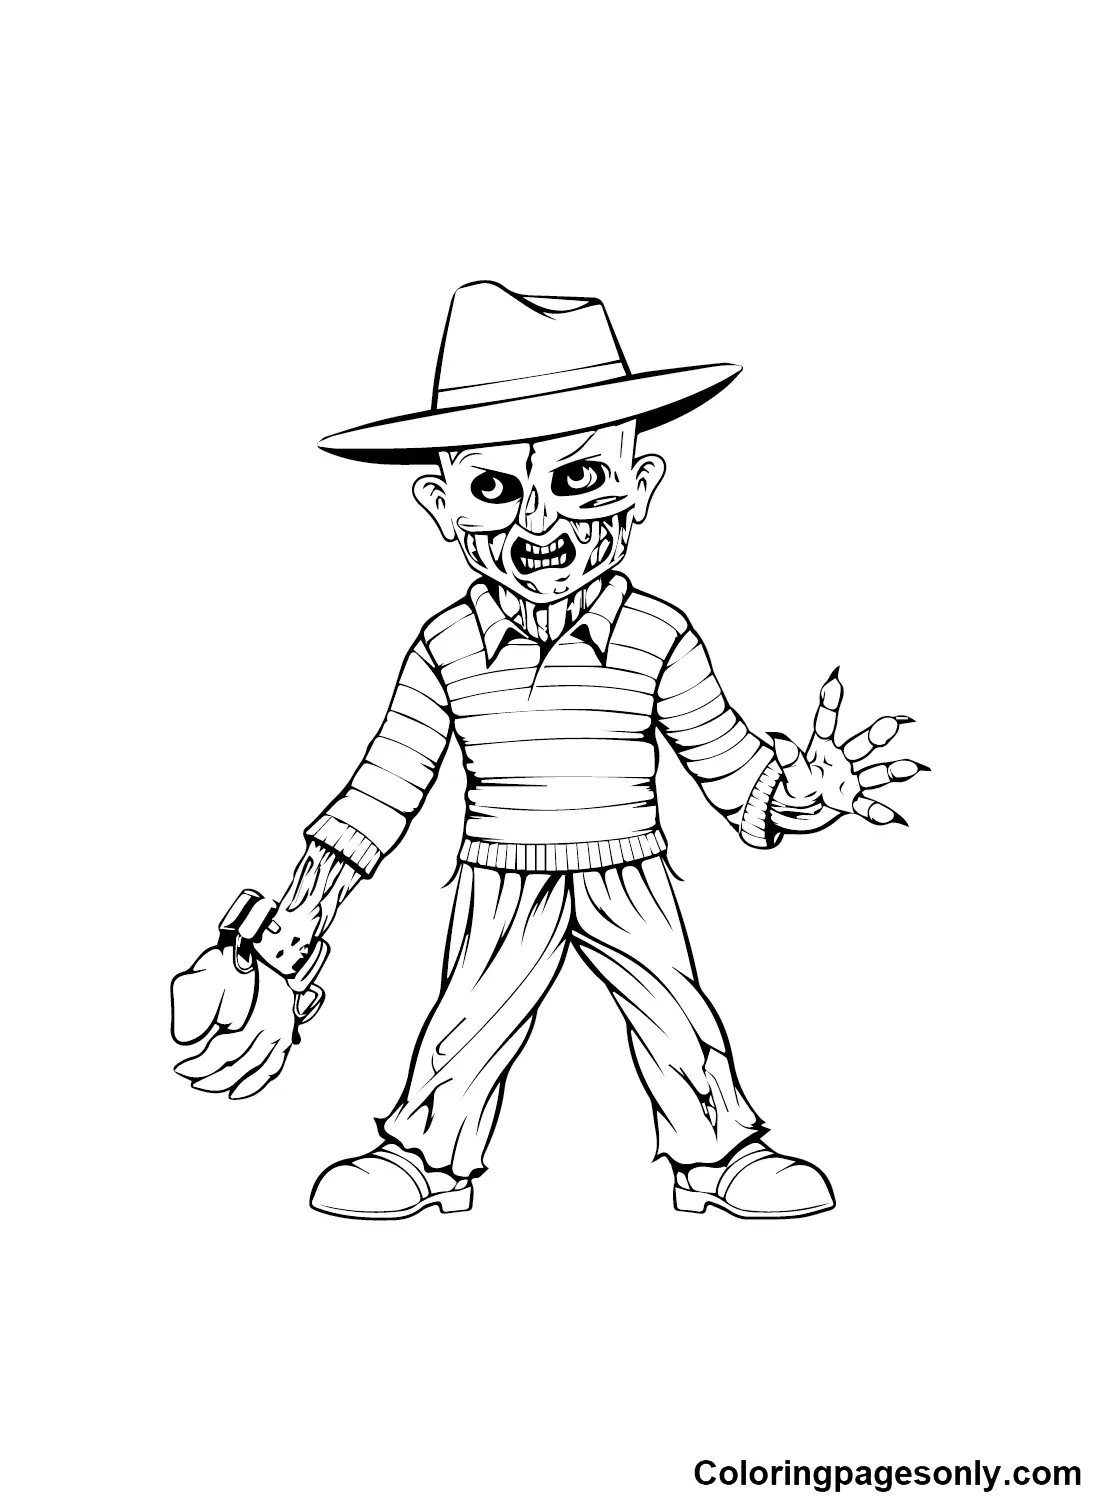 Freddy Krueger Coloring Pages